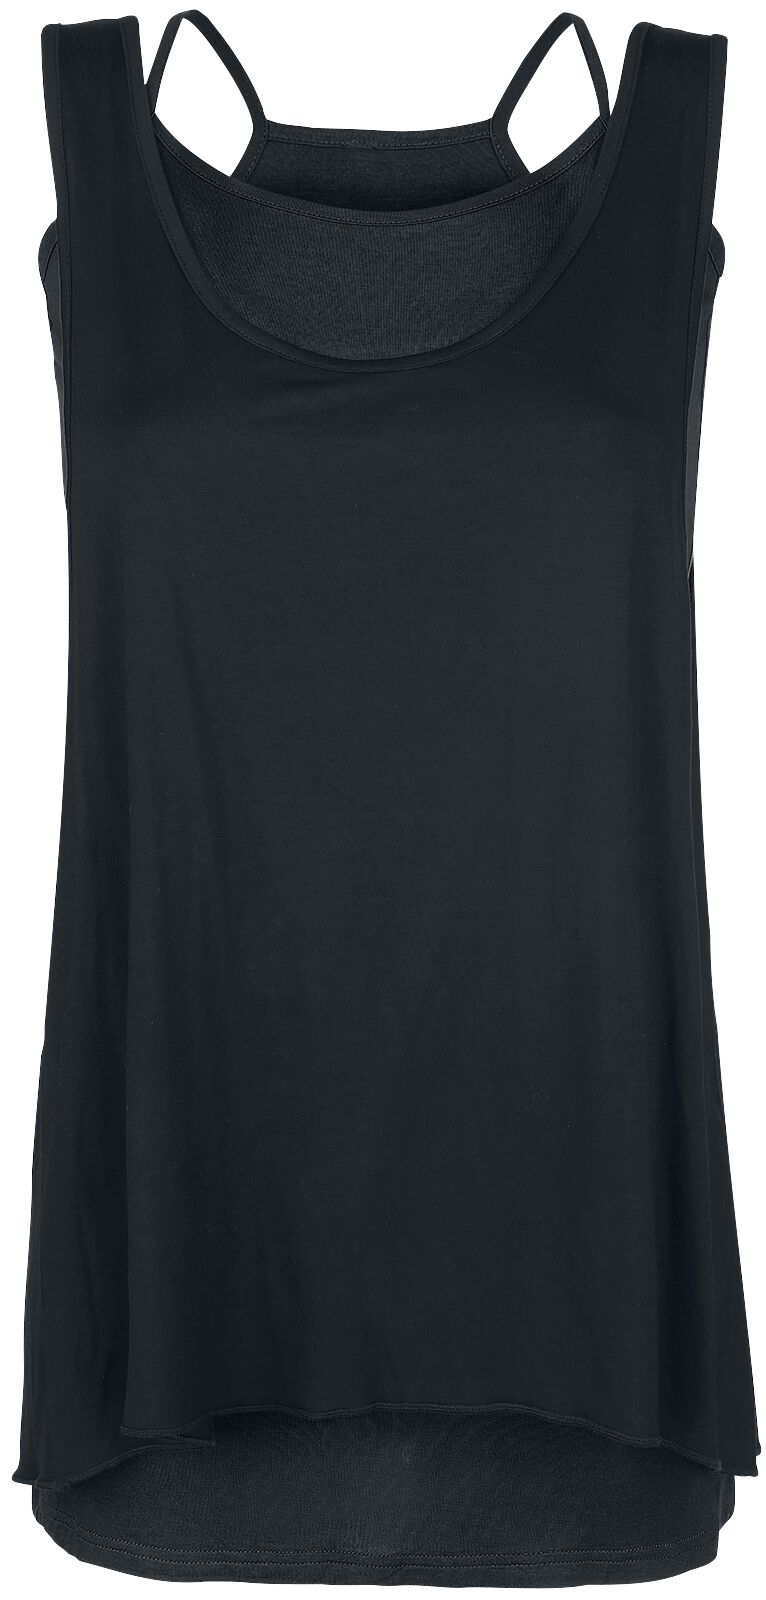 Image of Miniabito di Forplay - Two in One Dress - S a 5XL - Donna - nero